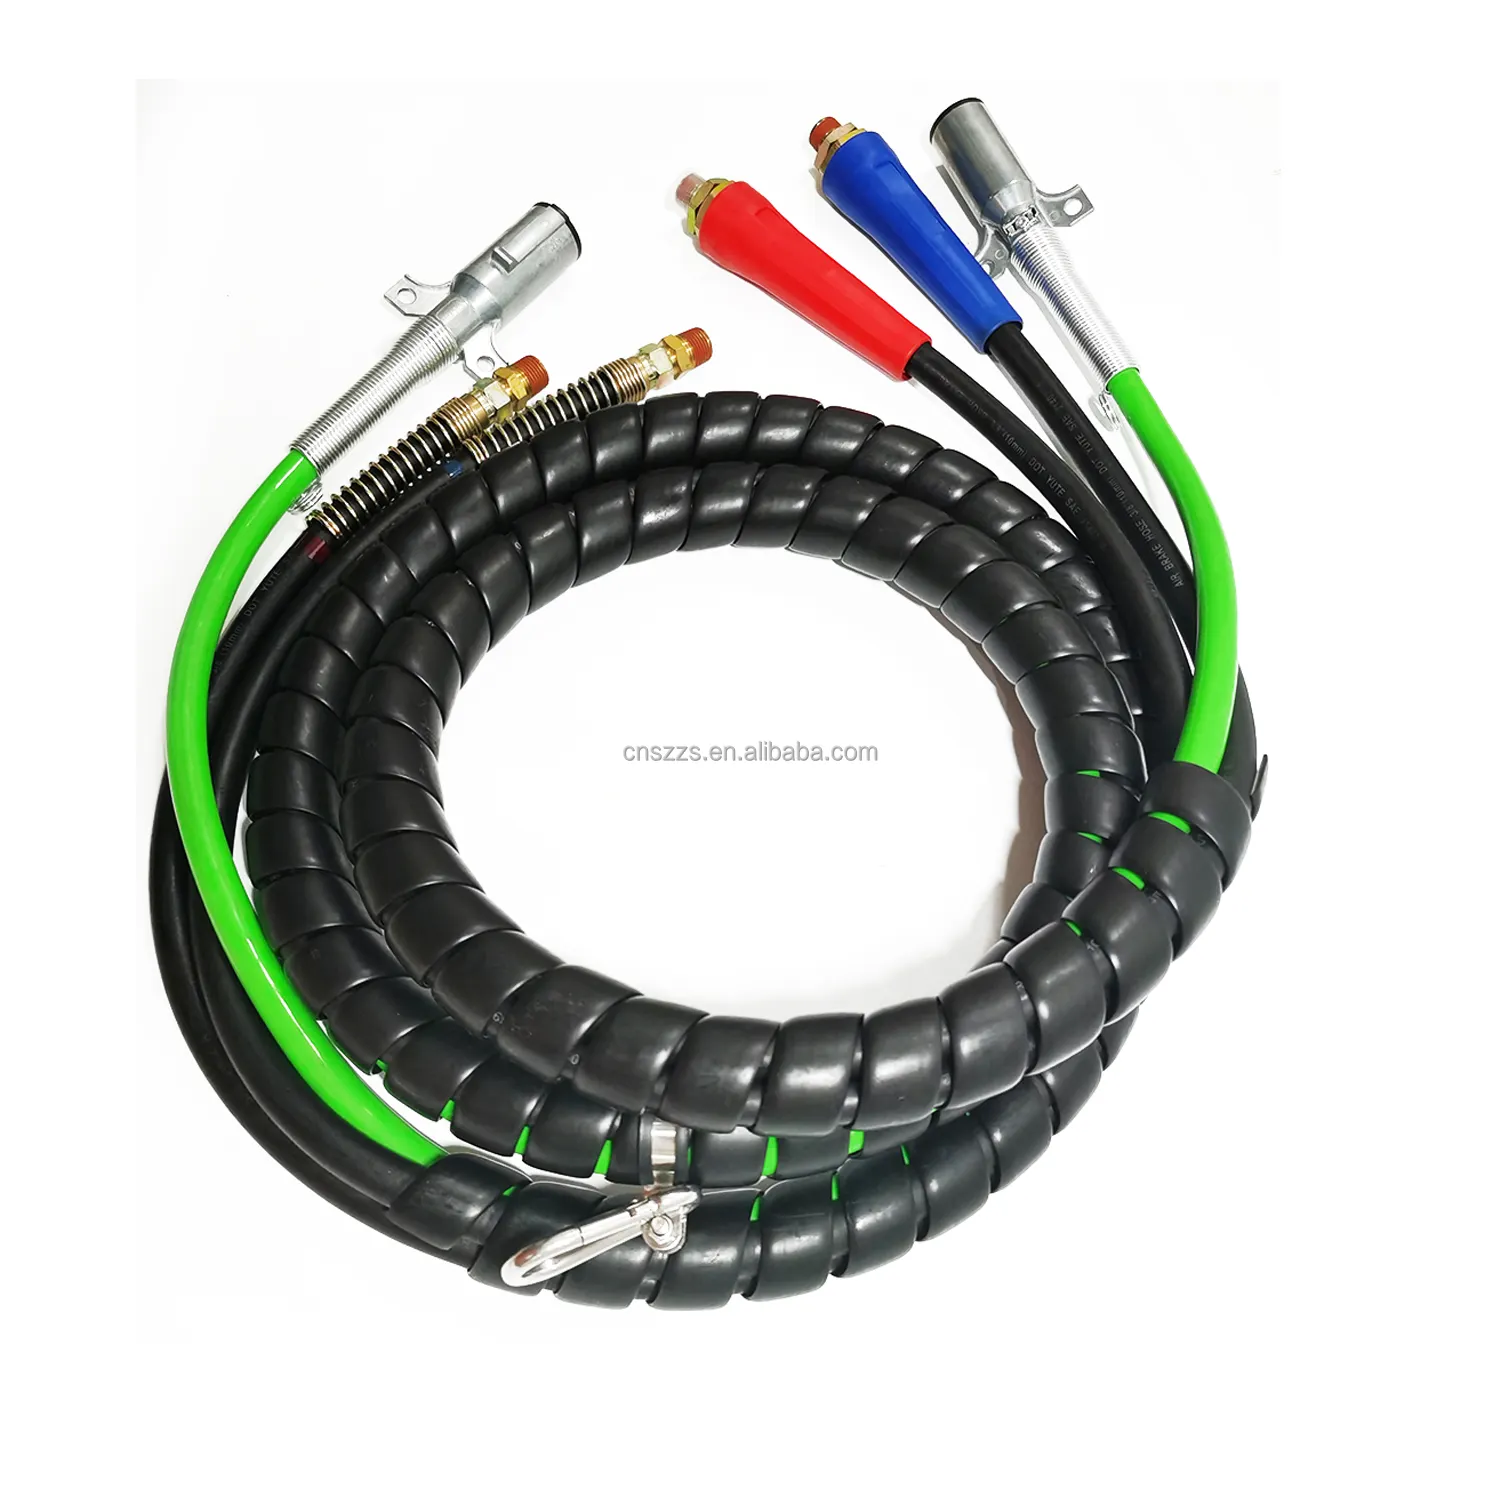 7-way trailer cable and point-type air brake hose 3 in 1, 12/15 ft